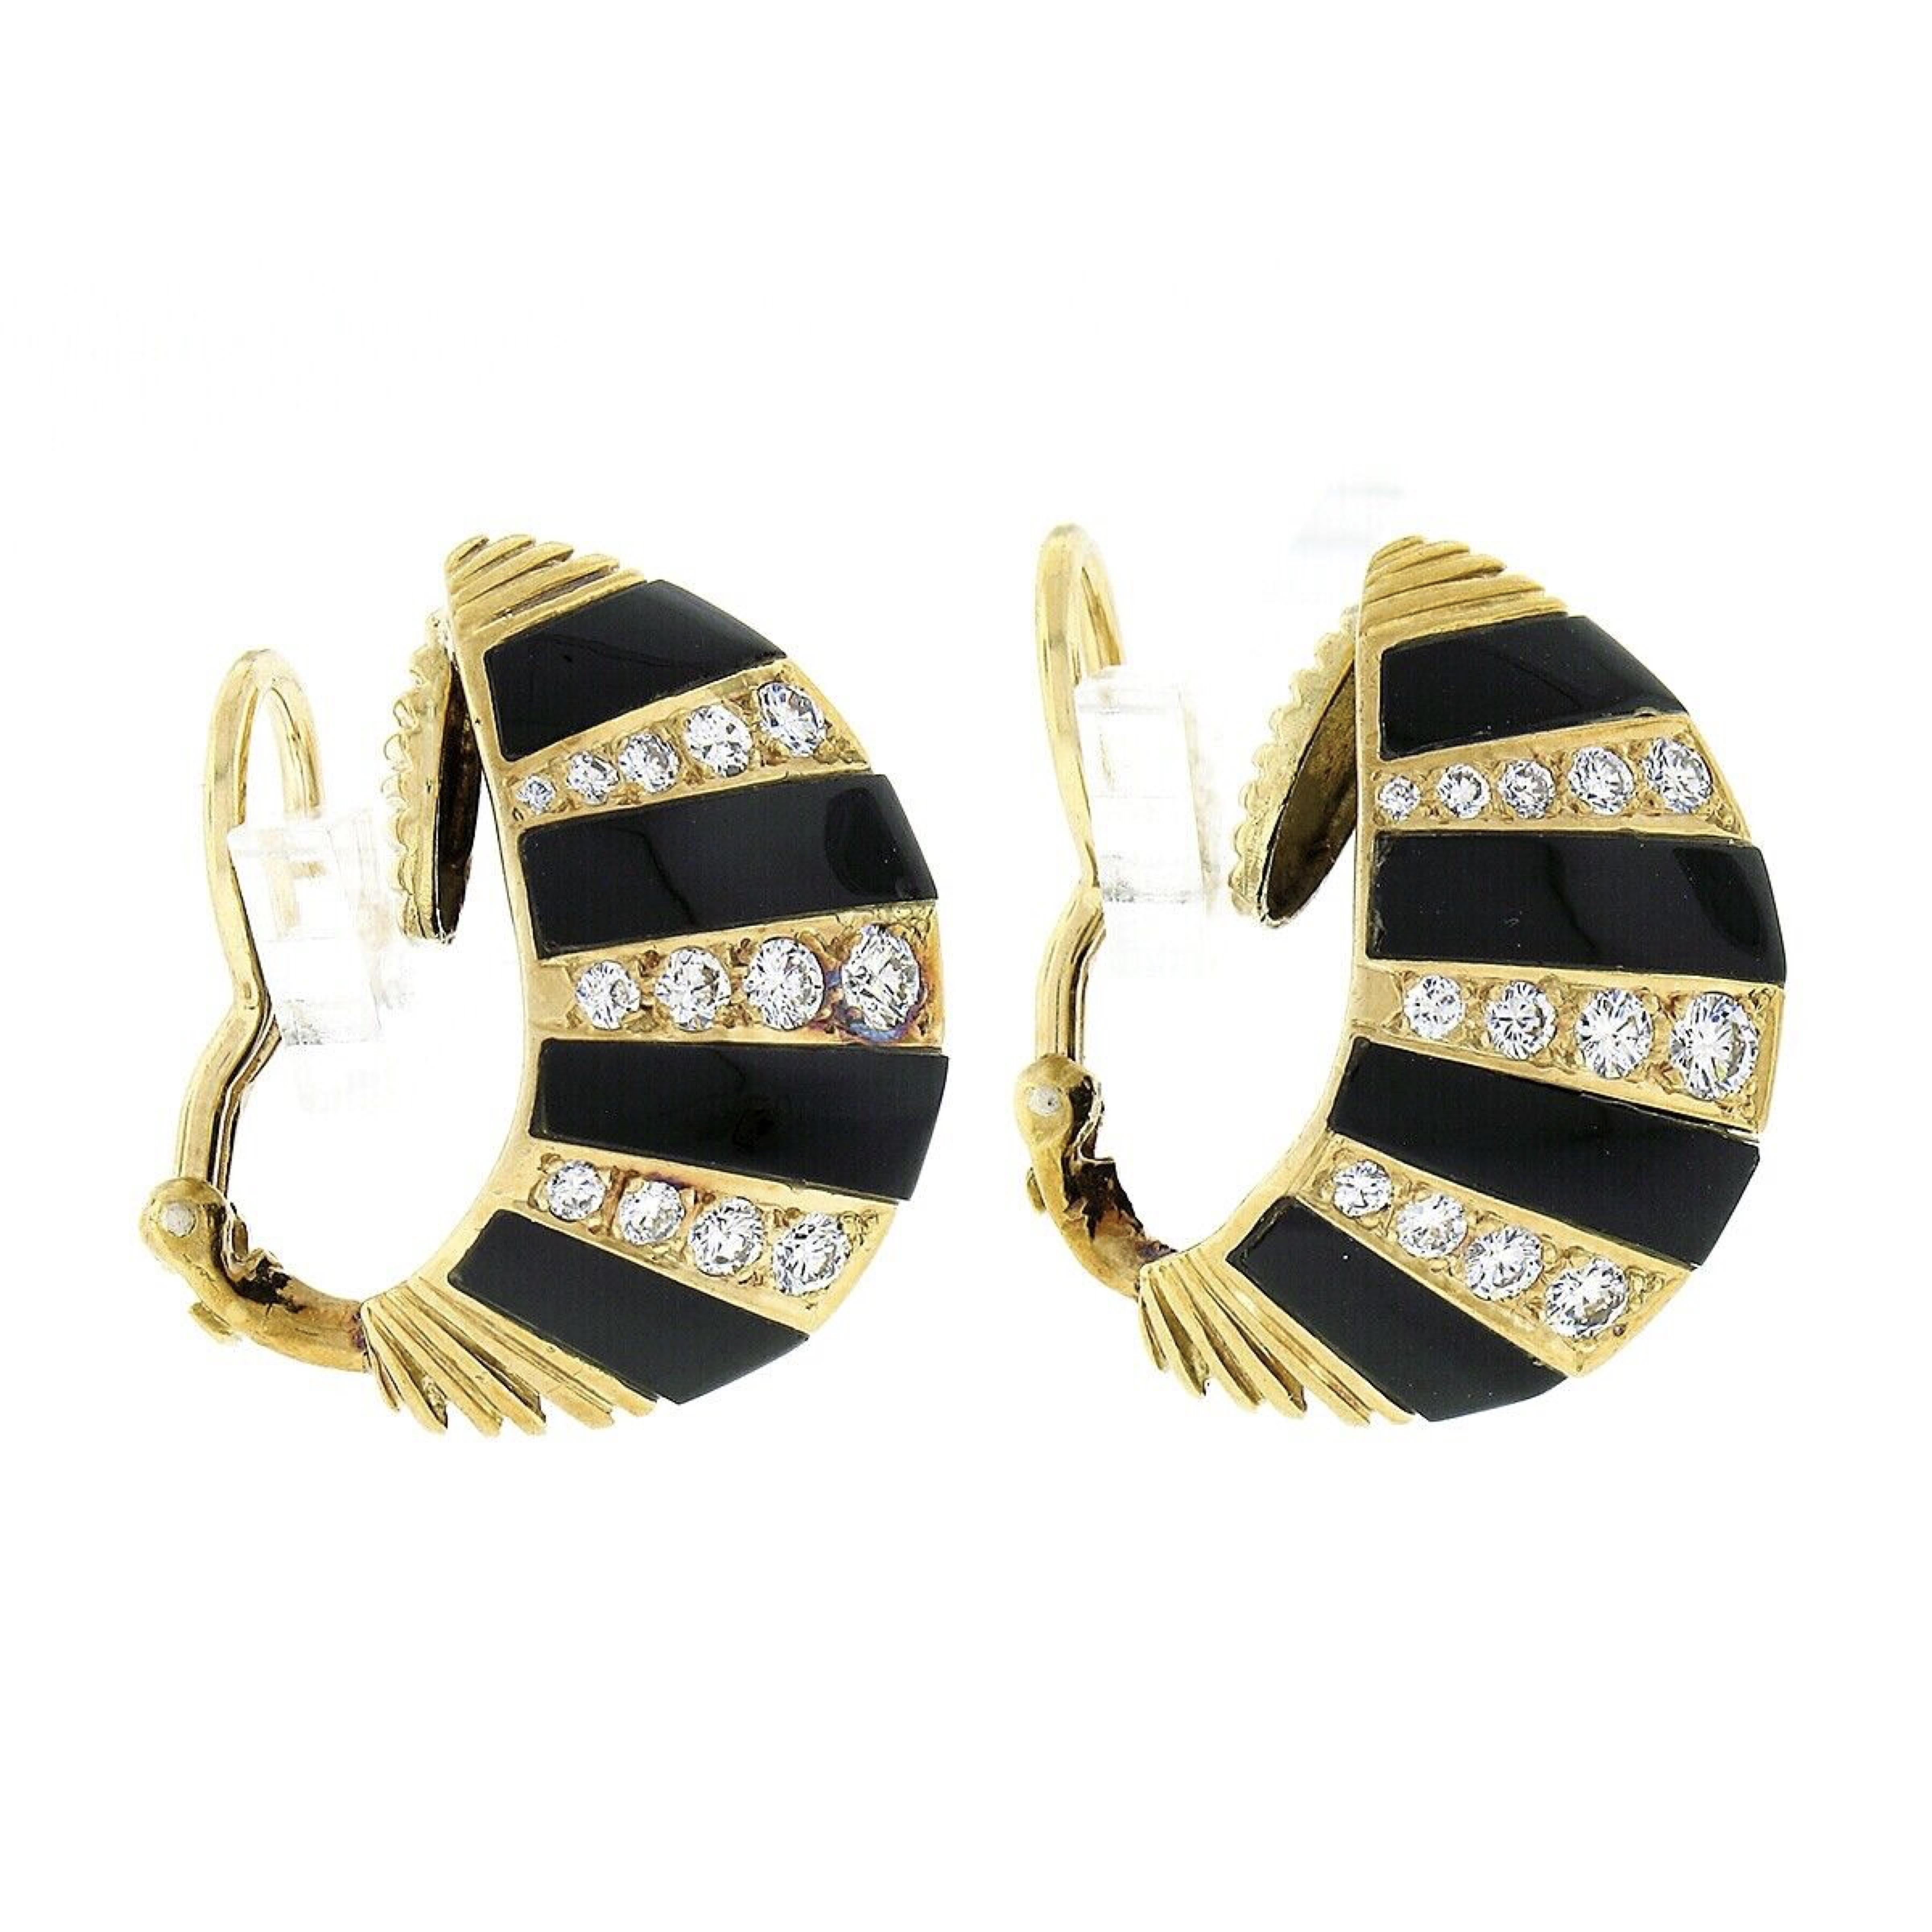 Vintage 18k Gold Inlaid Black Onyx & Pave Diamond Striped Domed Button Earrings In Good Condition For Sale In Montclair, NJ